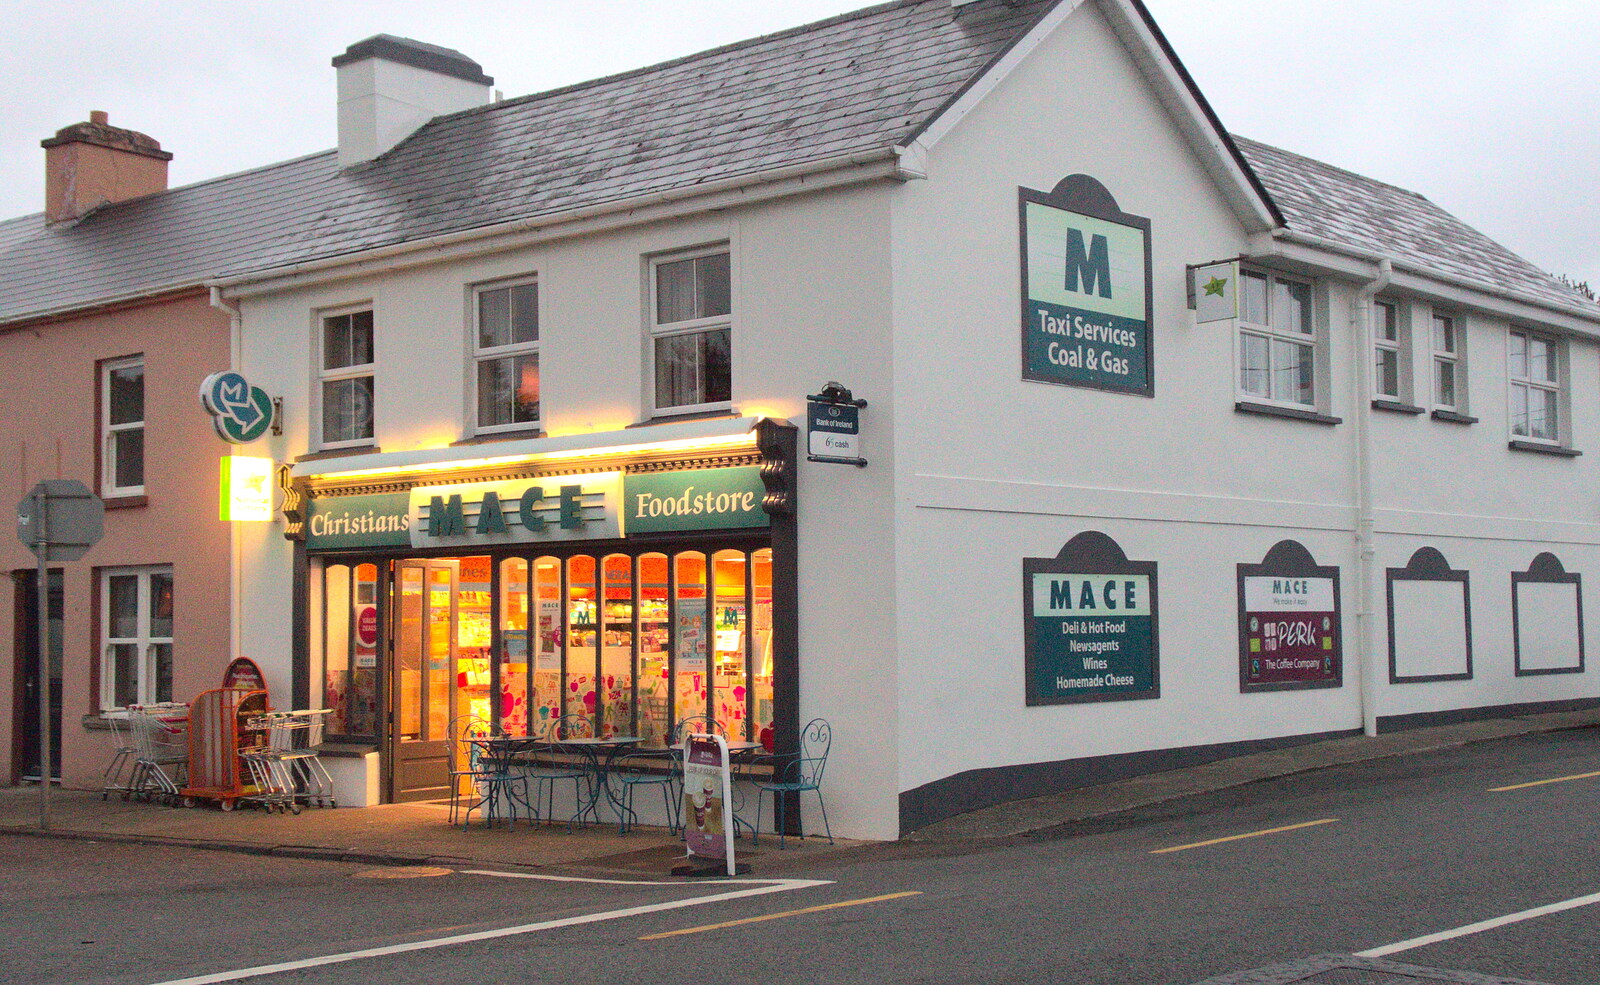 Christian's Mace food shop from A Seafari Boat Trip, Kenmare, Kerry, Ireland - 3rd August 2017